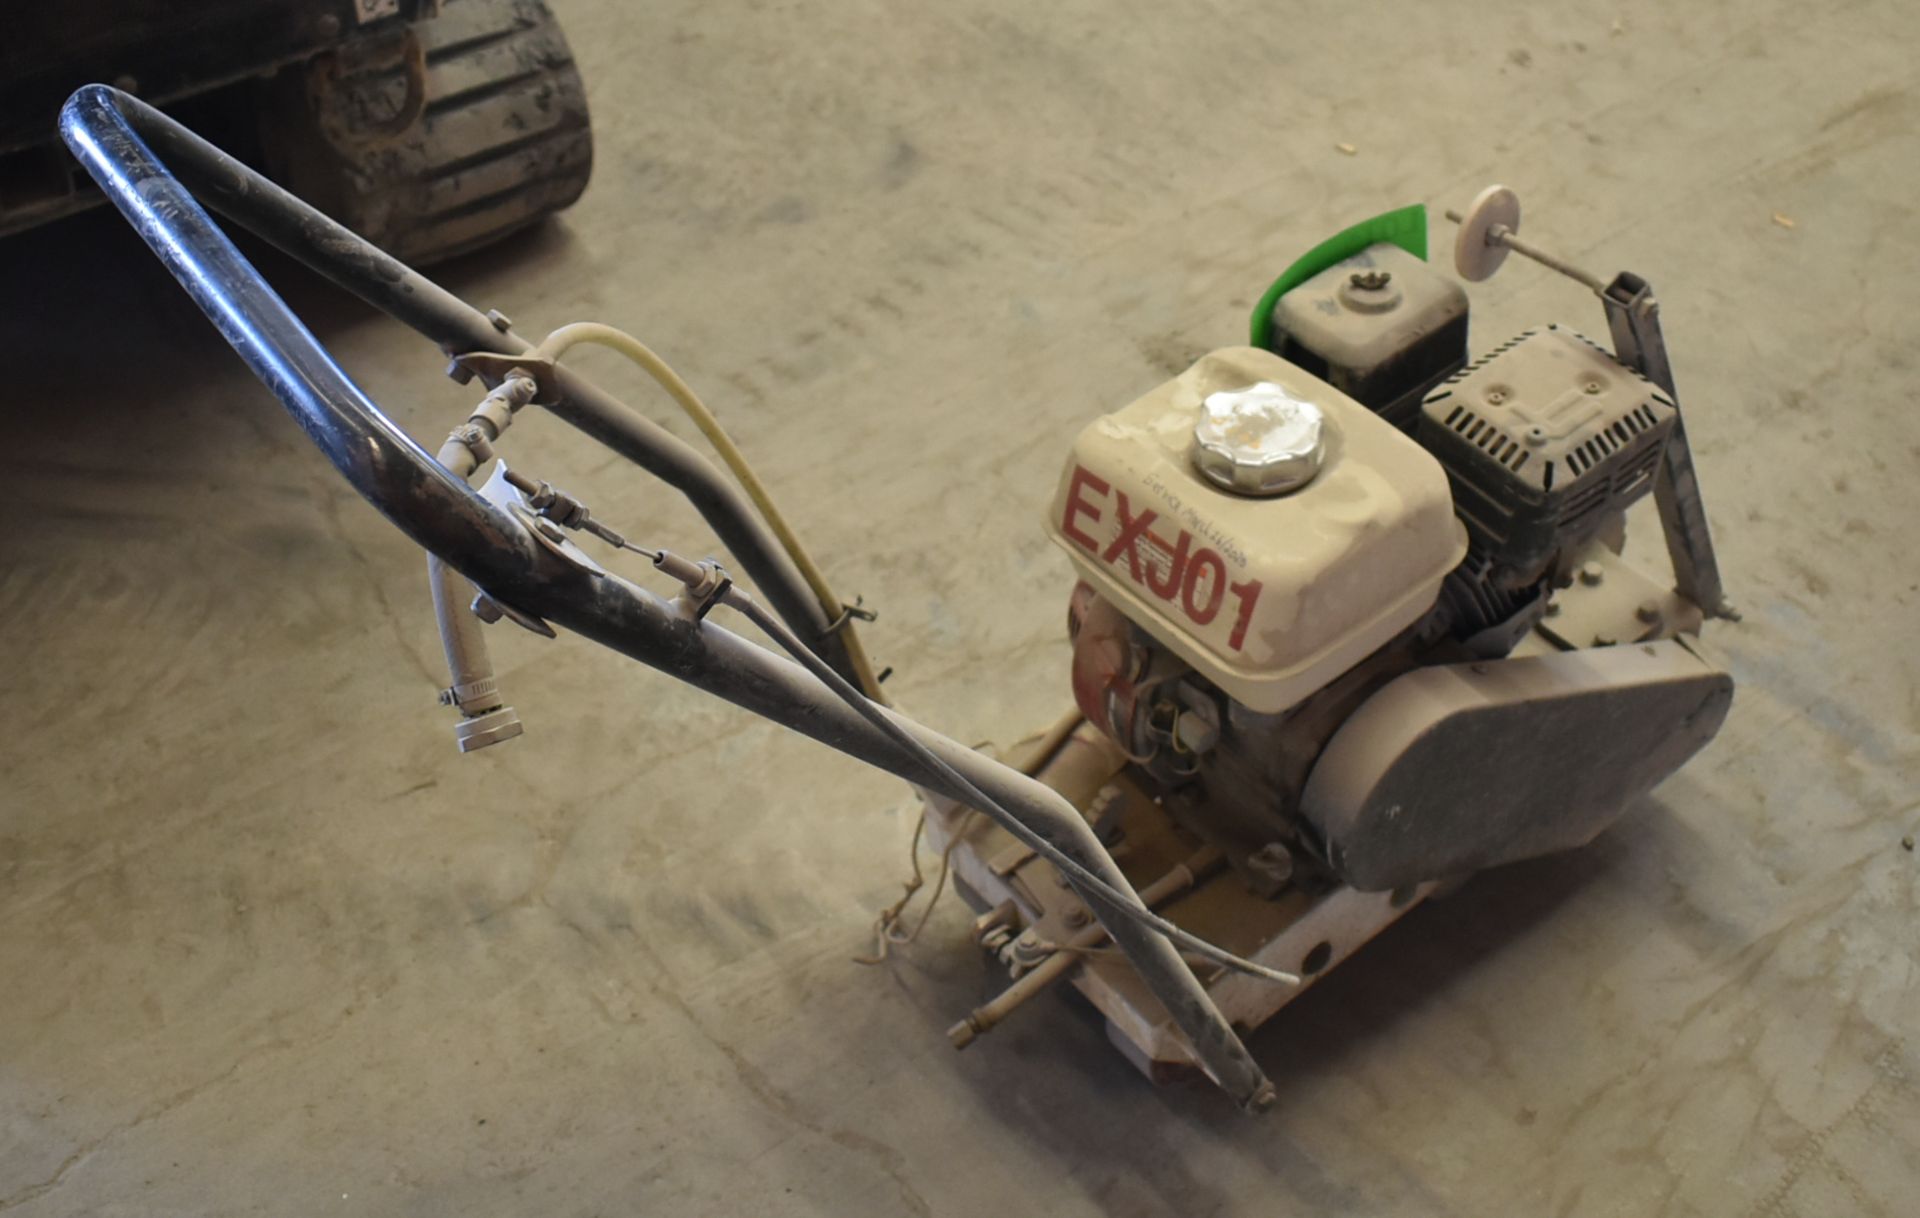 MFG UNKNOWN 8" GAS POWERED WALK BEHIND CONCRETE SAW WITH HONDA GX160 GAS POWERED MOTOR, S/N N/A - Image 3 of 4